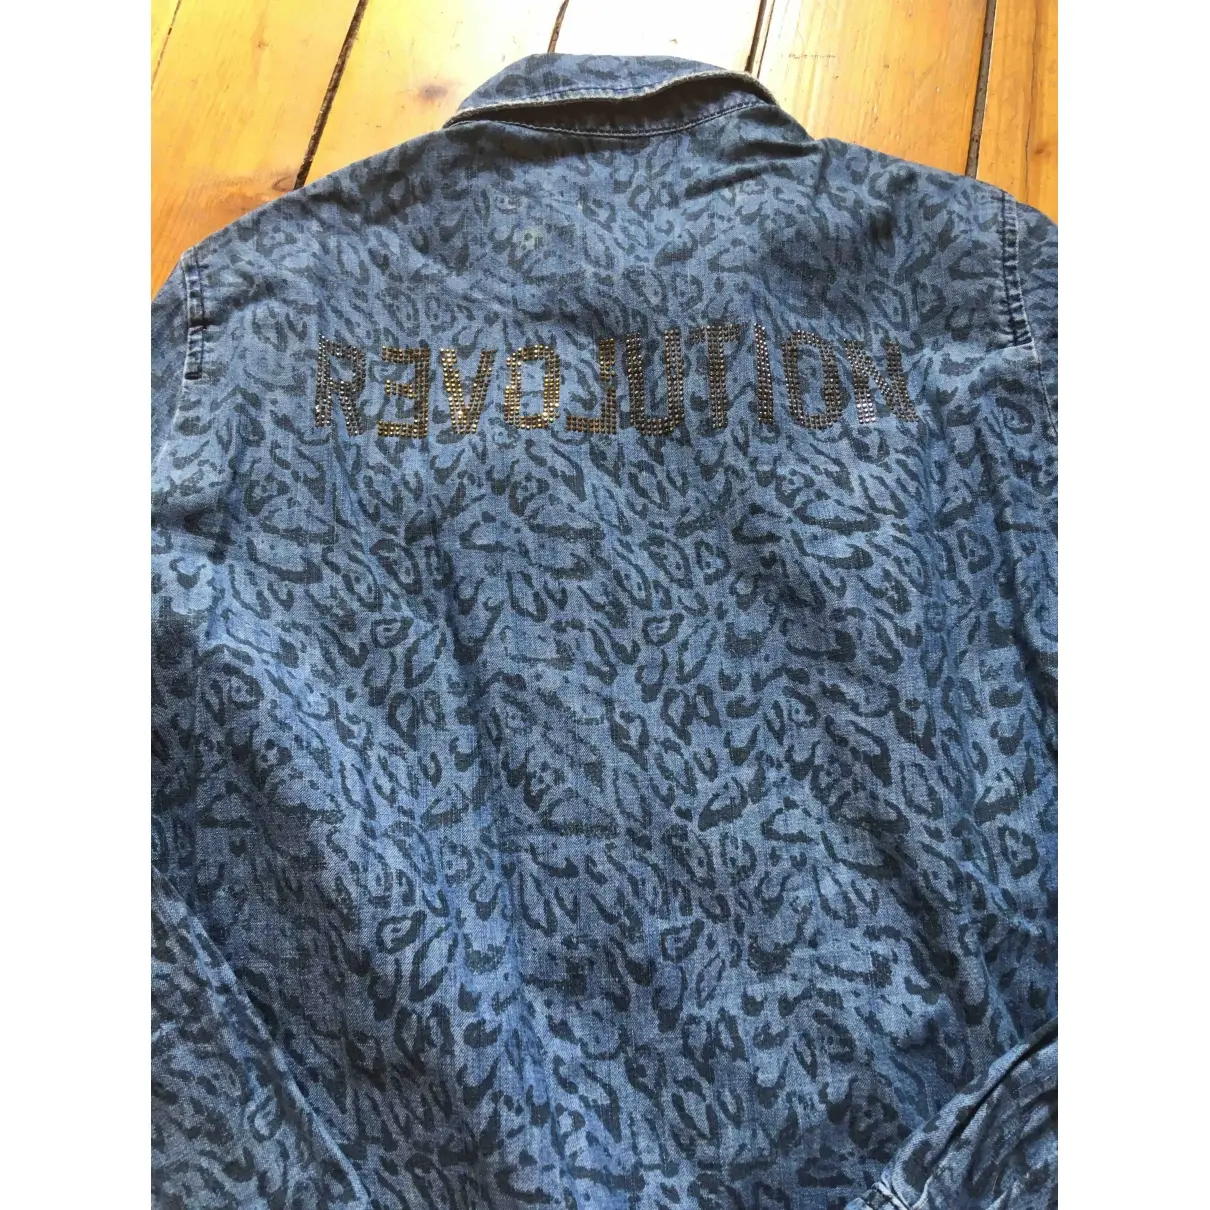 Zadig & Voltaire Shirt for sale